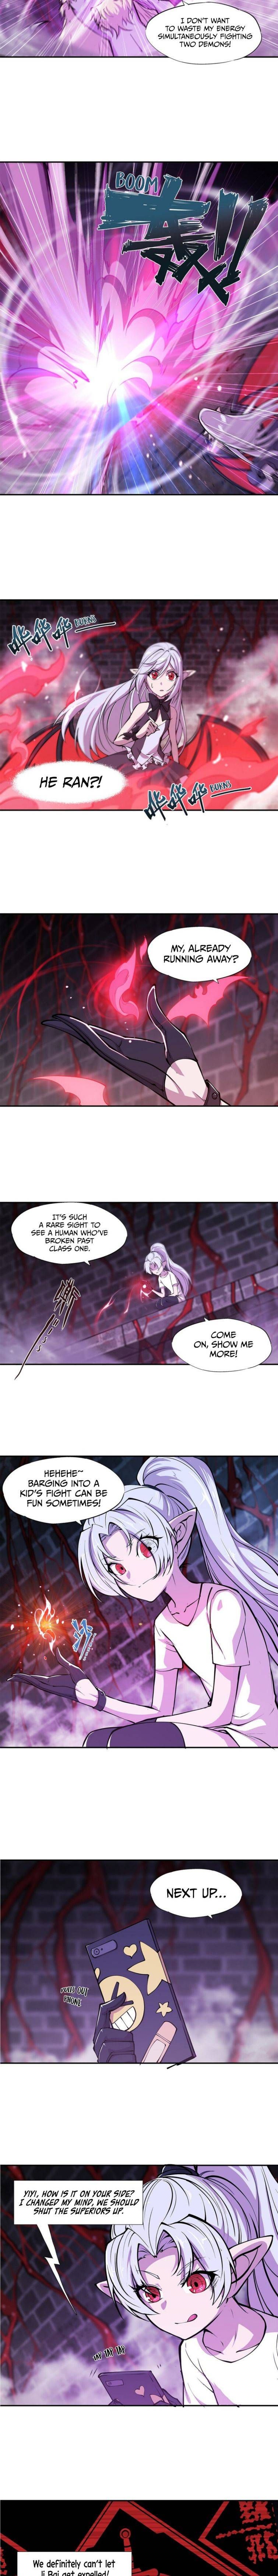 The Blood Princess and the Knight Chapter 94 page 3